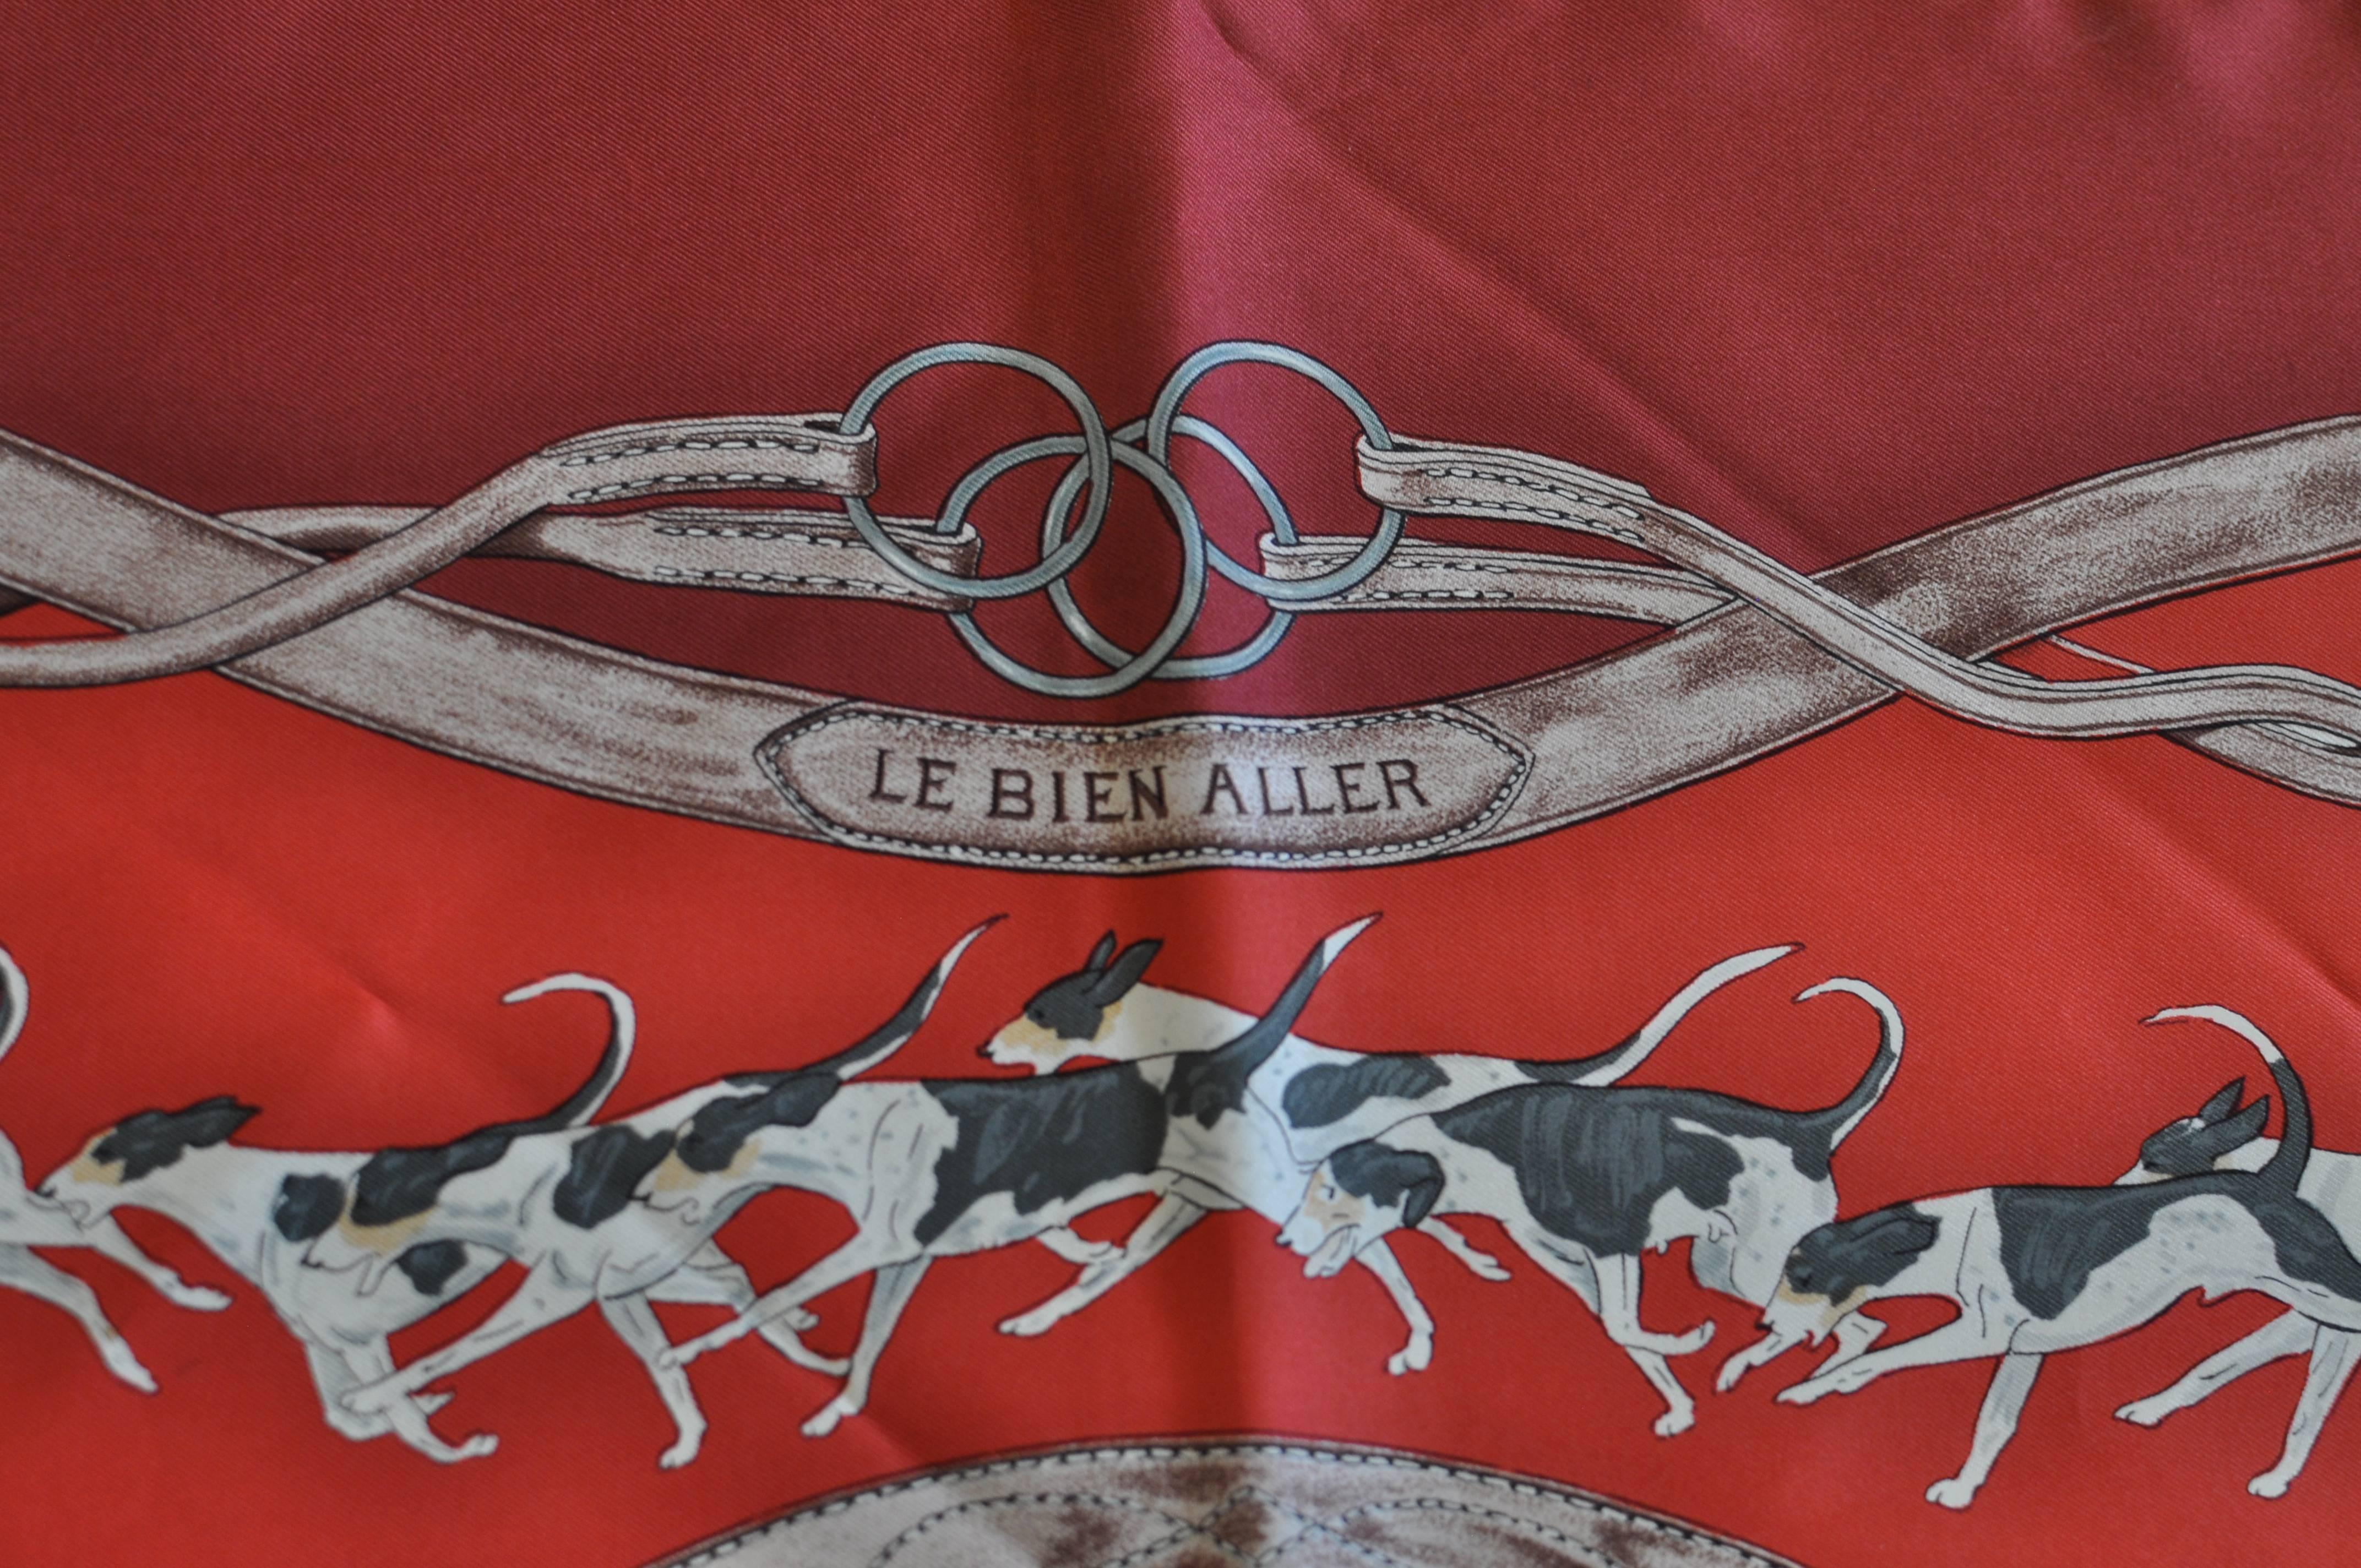 This is a scarf dedicated to the hunt with images of riders on horses, dogs, horns and assorted riding equipment. The background colors are burgundy and blue red with browns, beiges, and green. A lovely scarf in excellent condition for its age.